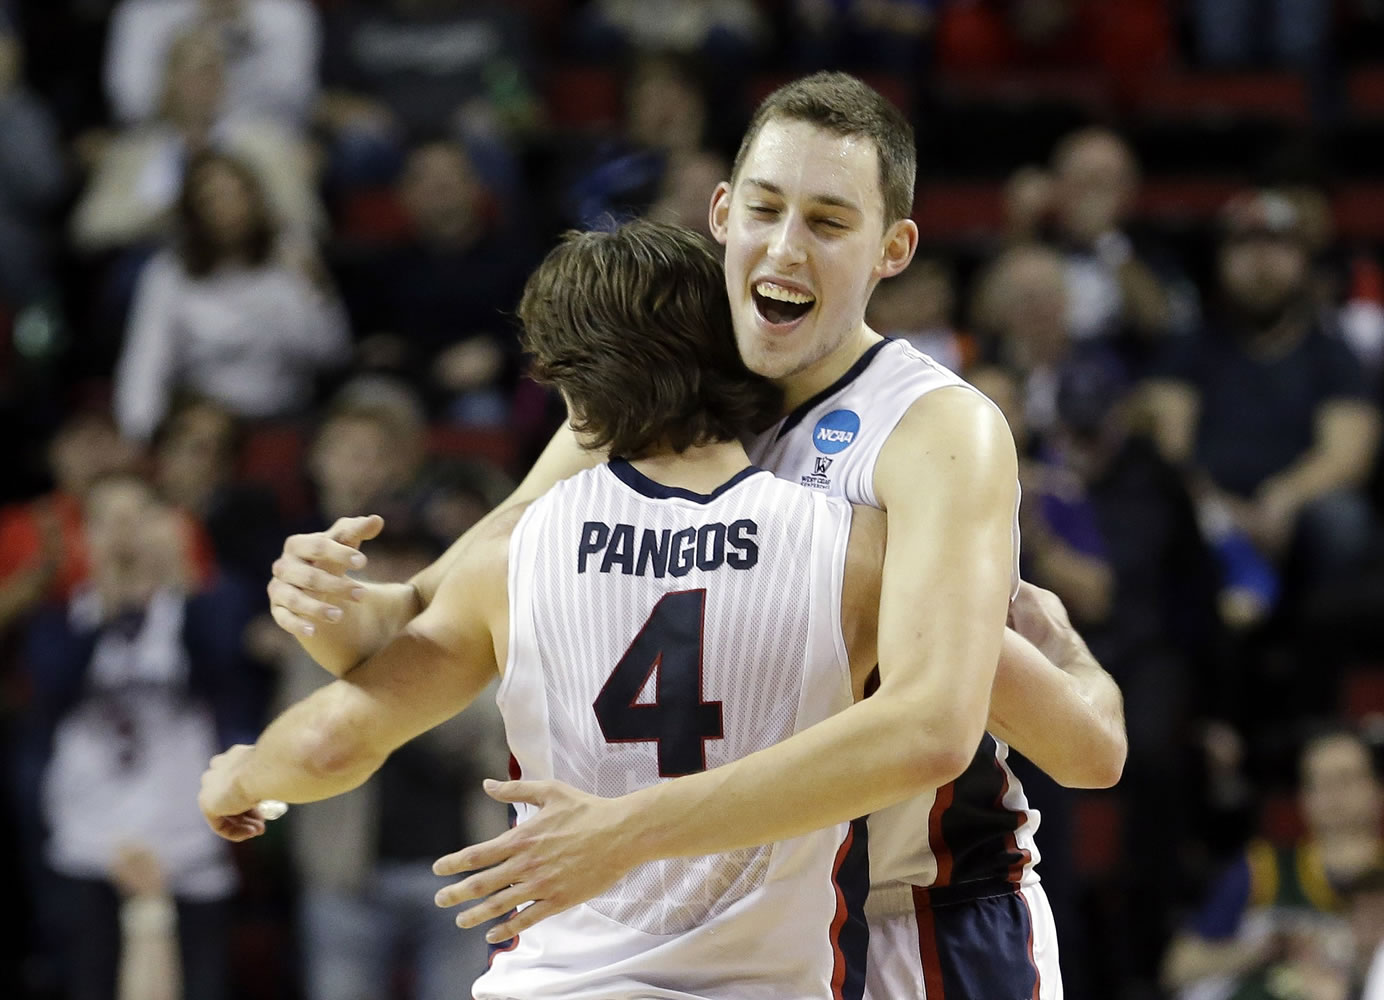 Gonzaga's Kyle Wiltjer, right, embraces Kevin Pangos after the Bulldogs beat Iowa in an NCAA tournament game in Seattle, Sunday, March 22, 2015. Gonzaga won 87-68.